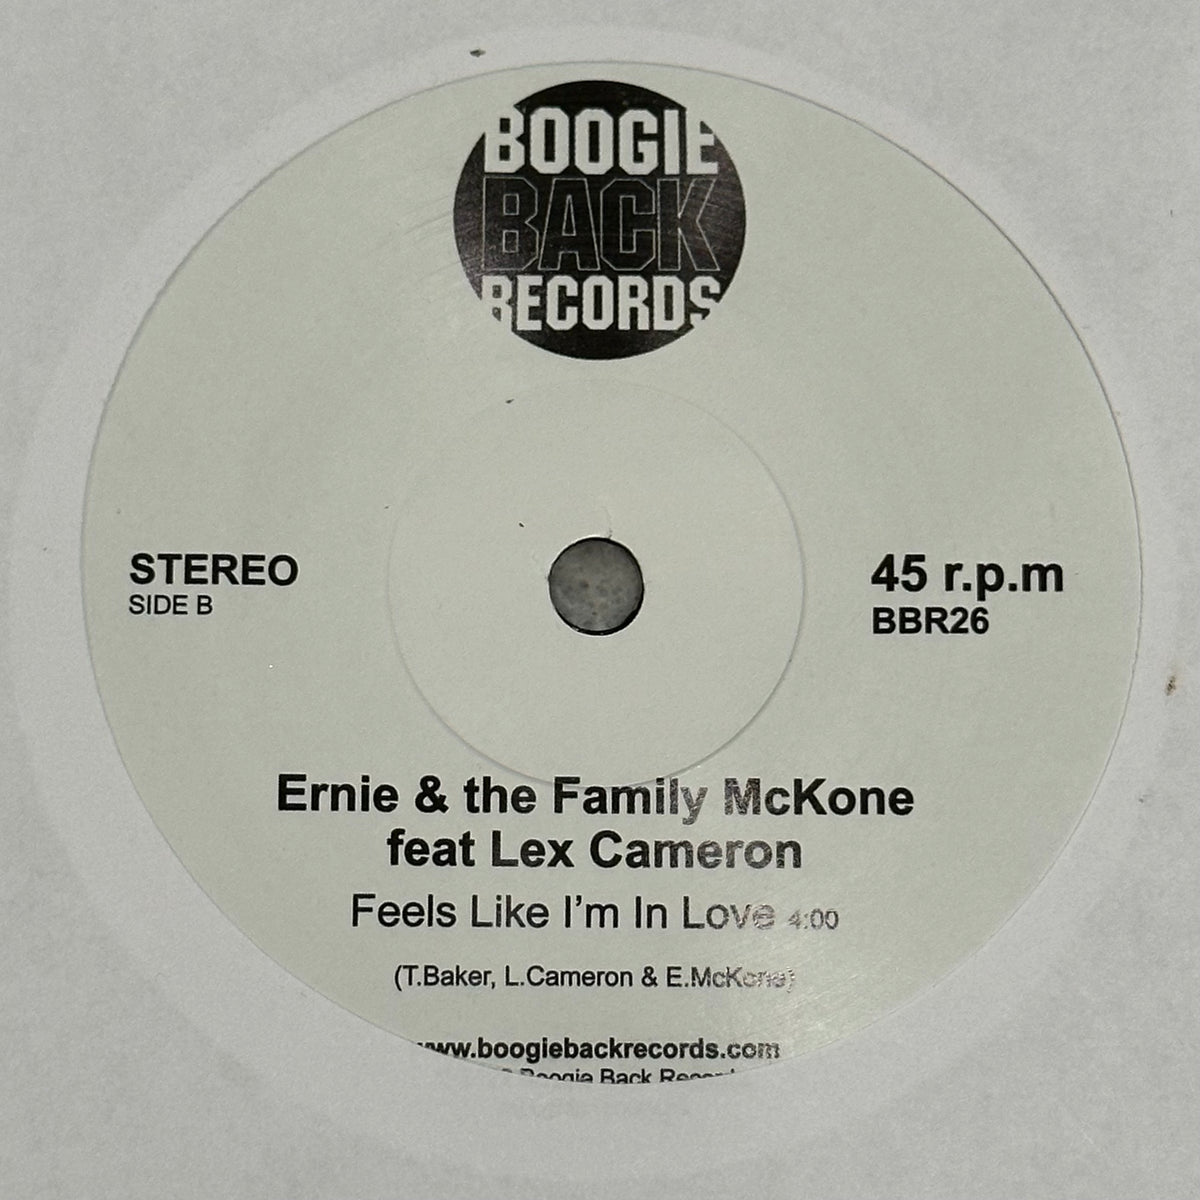 Ernie & the Family McKone - In The Thick Of It b/w Feels Like I'm In Love